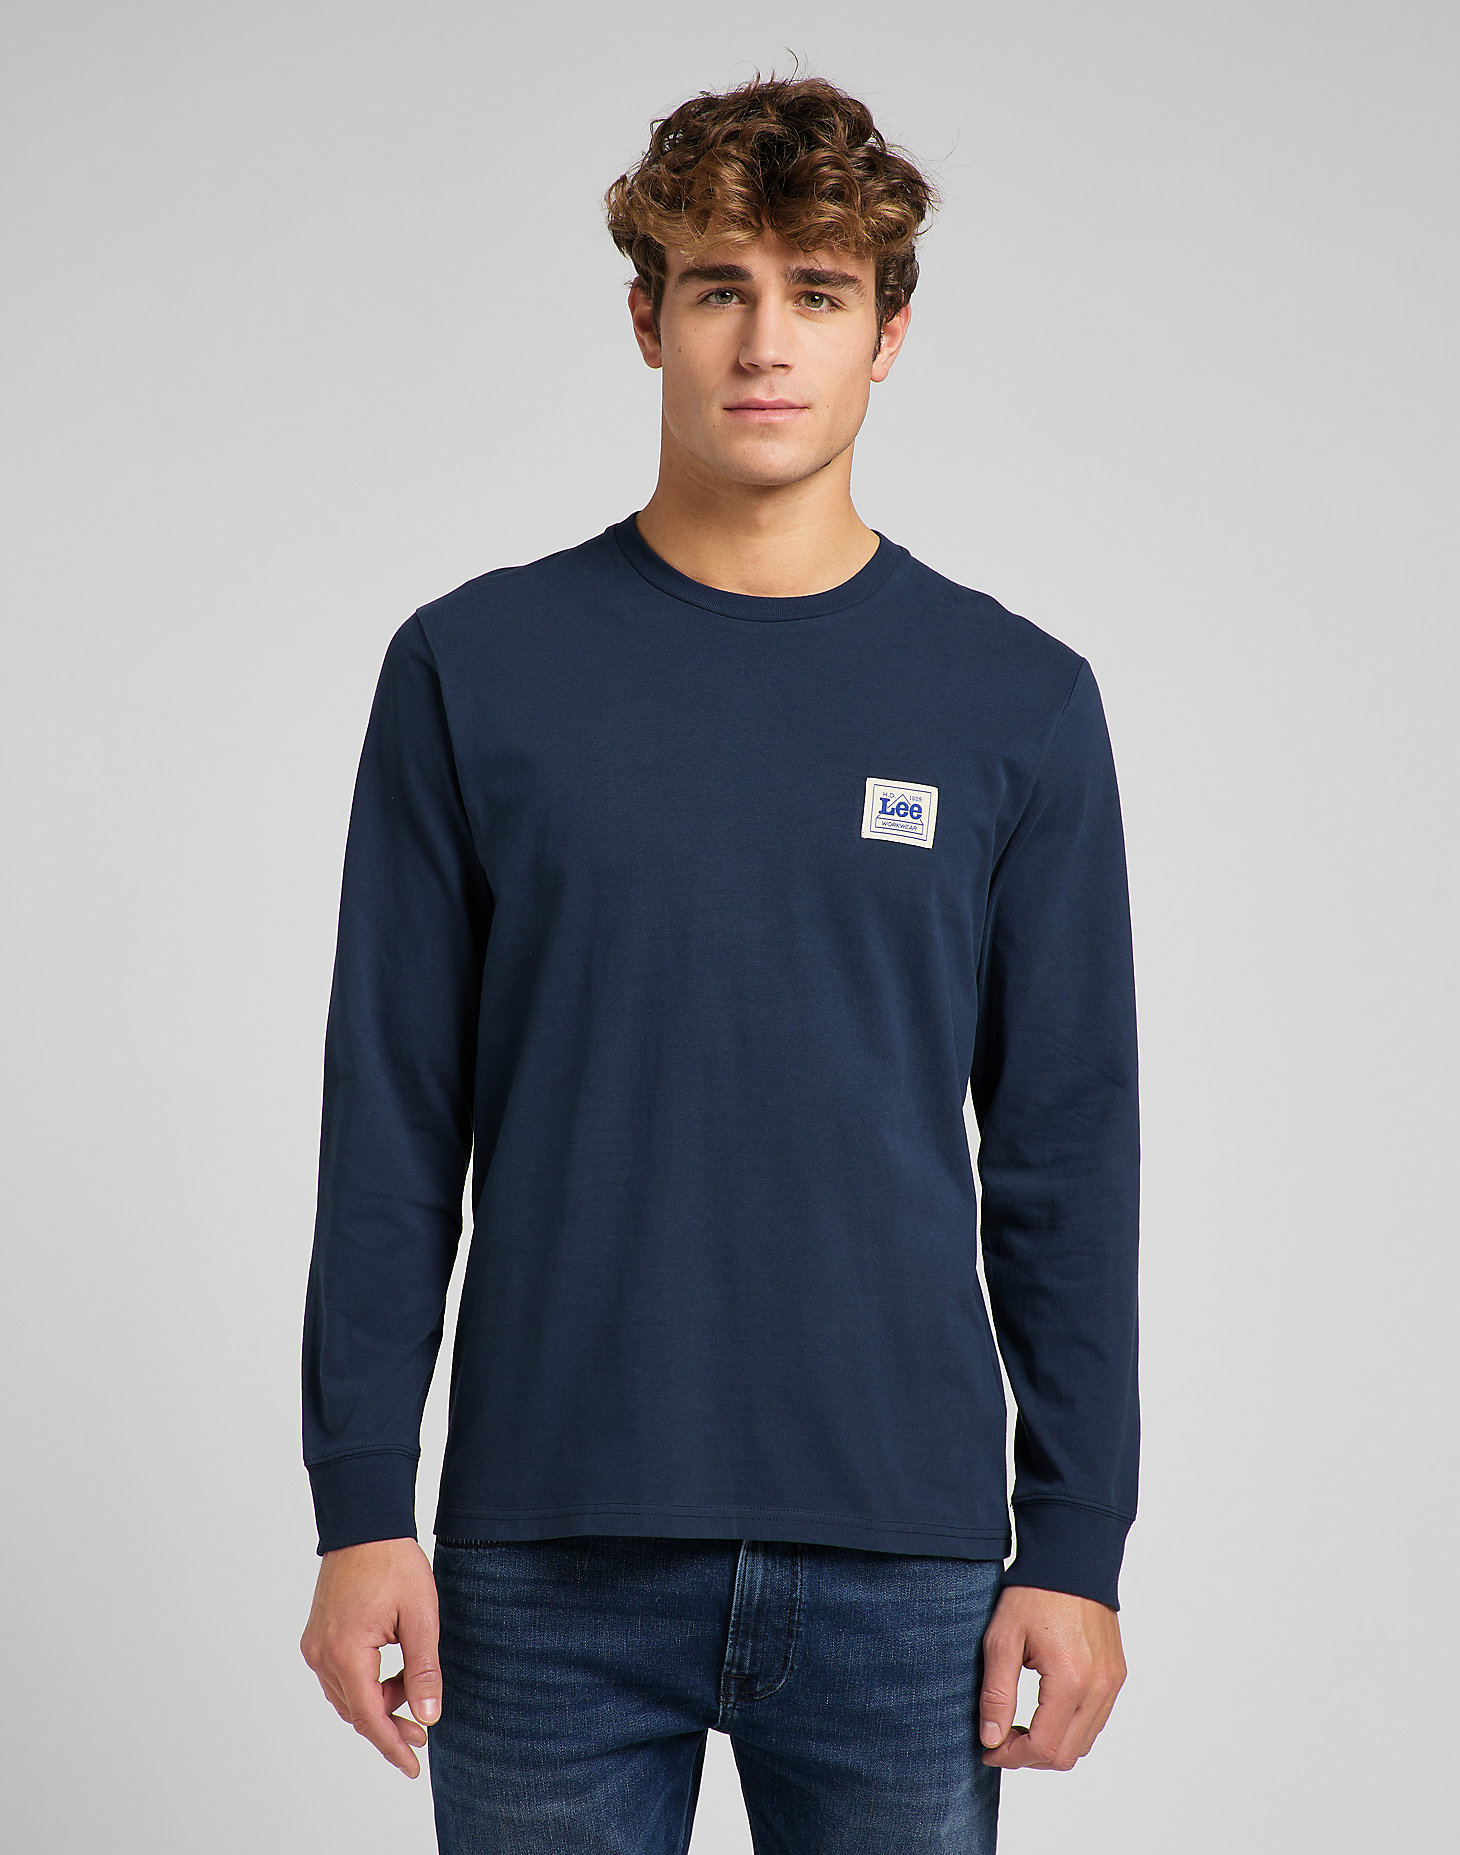 Long Sleeve Branded Tee in Bright Navy main view